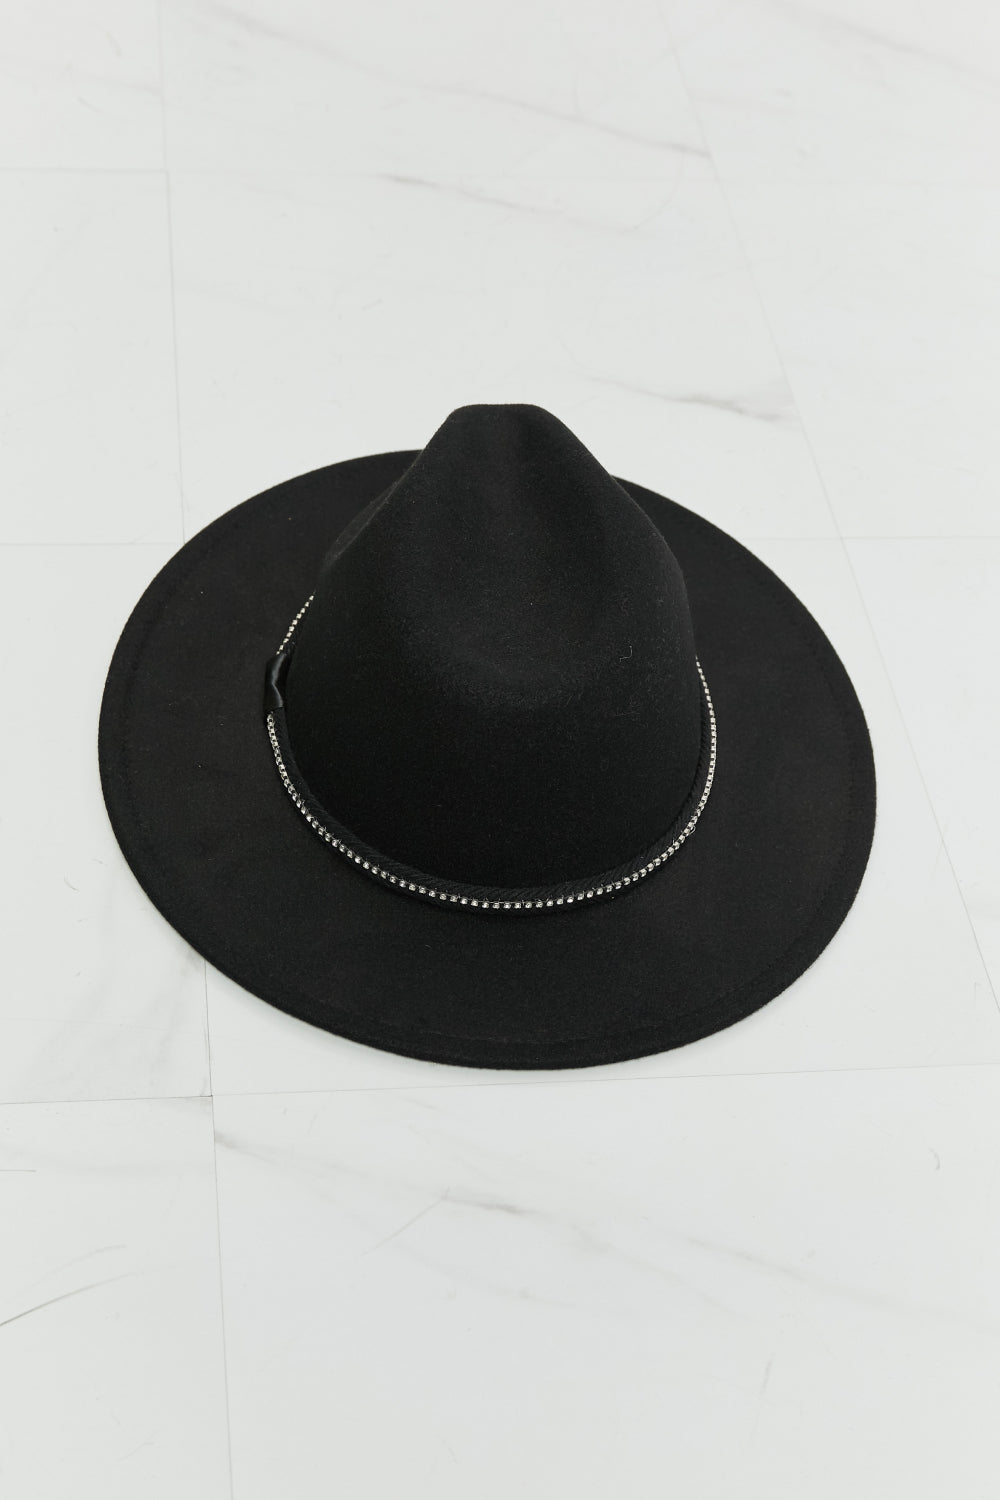 Fame Bring It Back Fedora Hat Print on any thing USA/STOD clothes